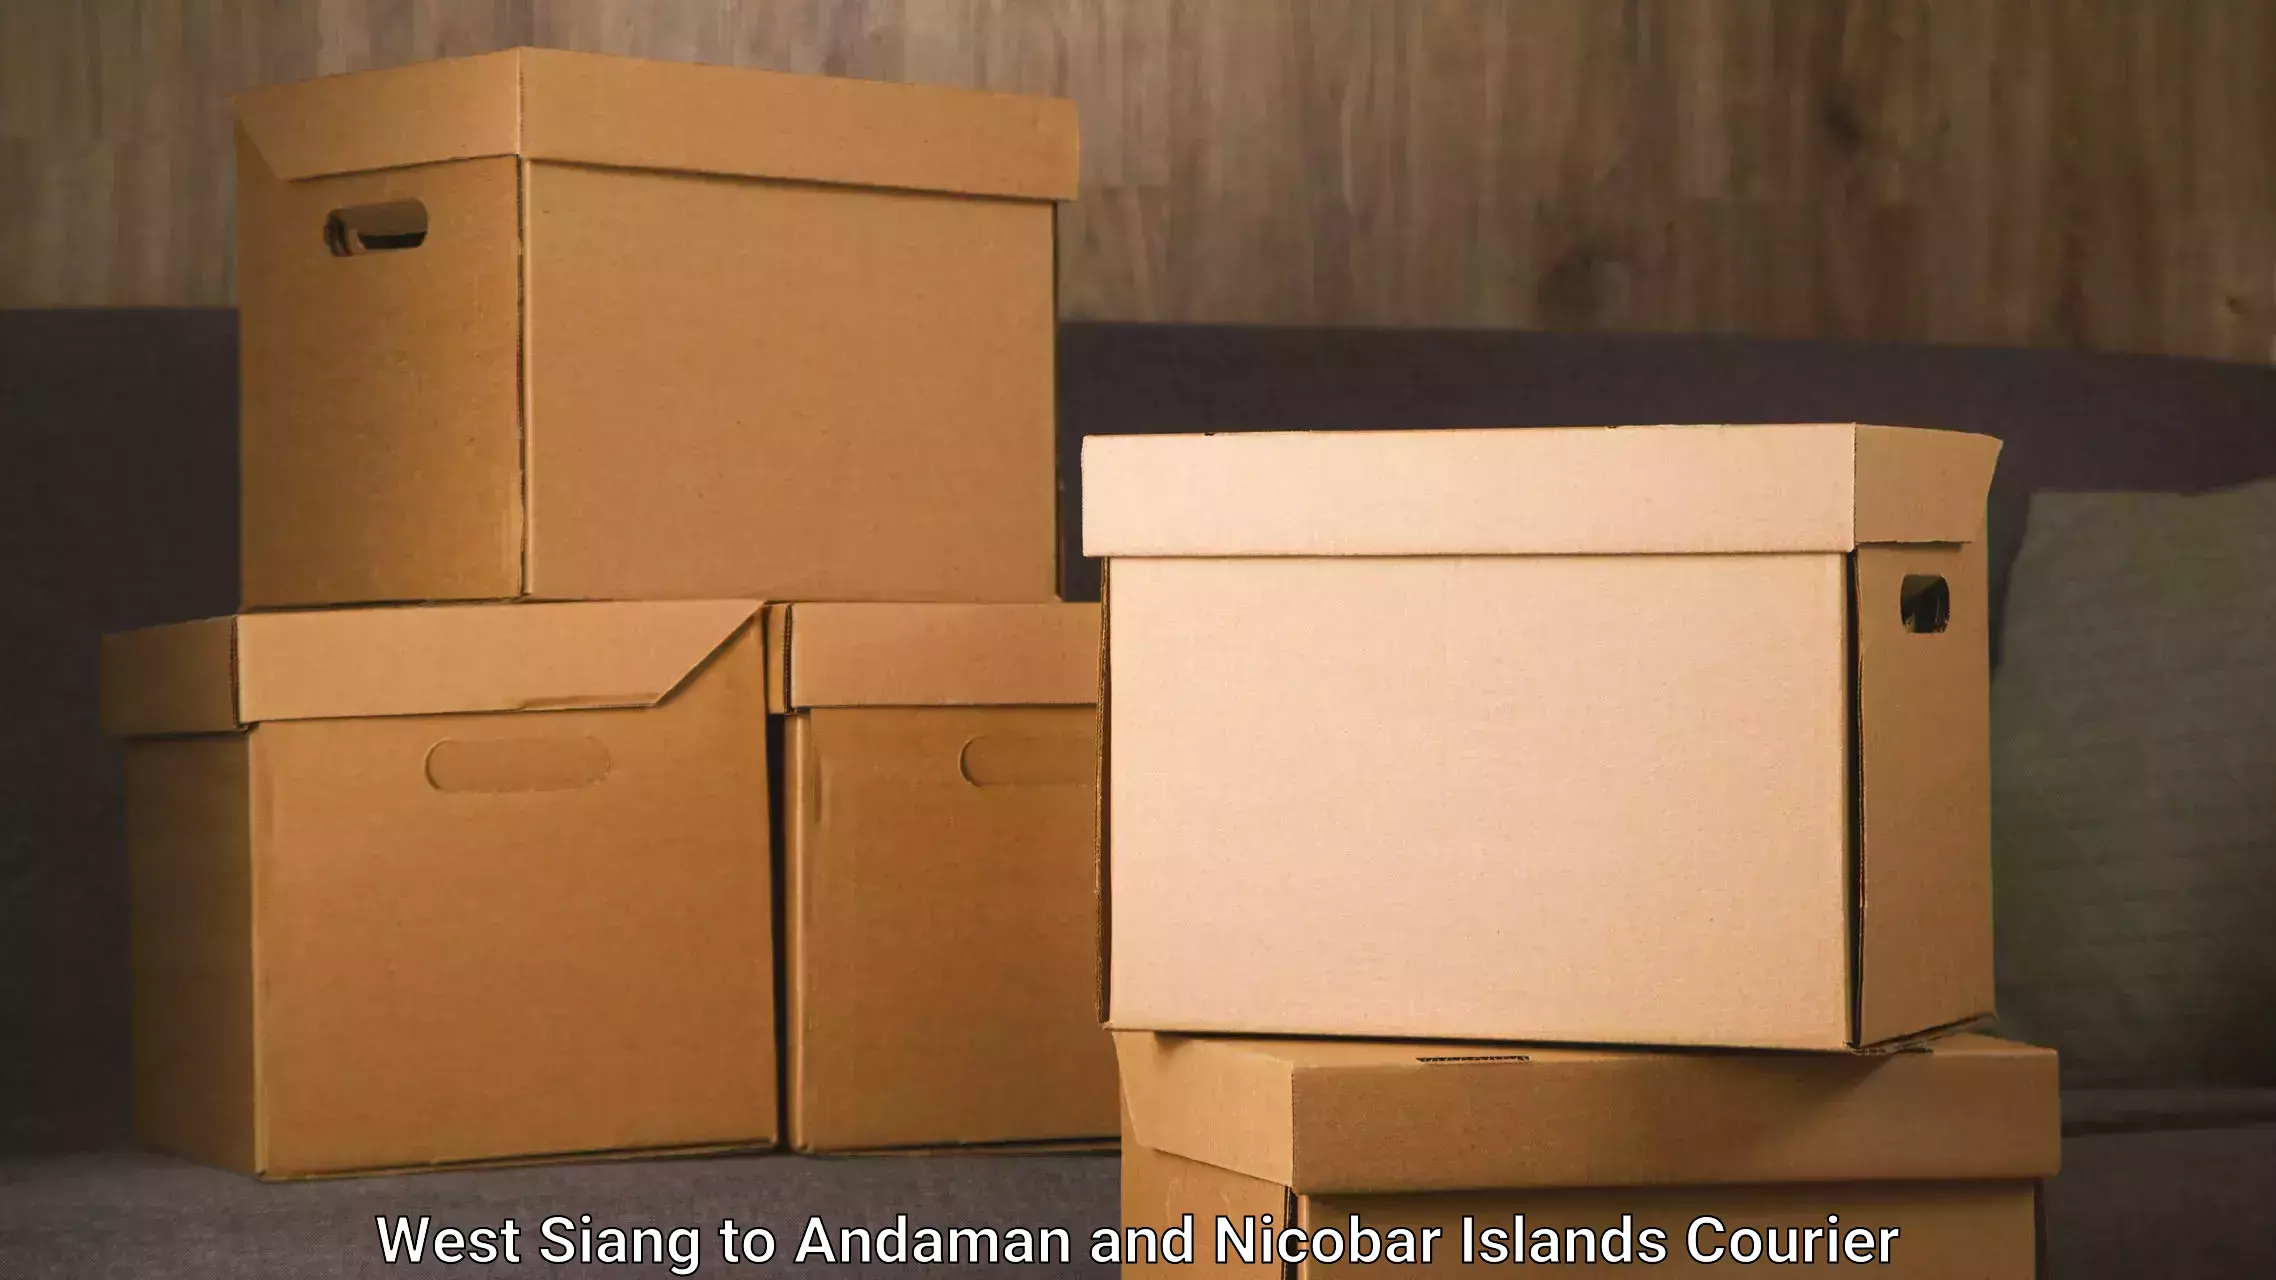 International courier networks West Siang to Andaman and Nicobar Islands